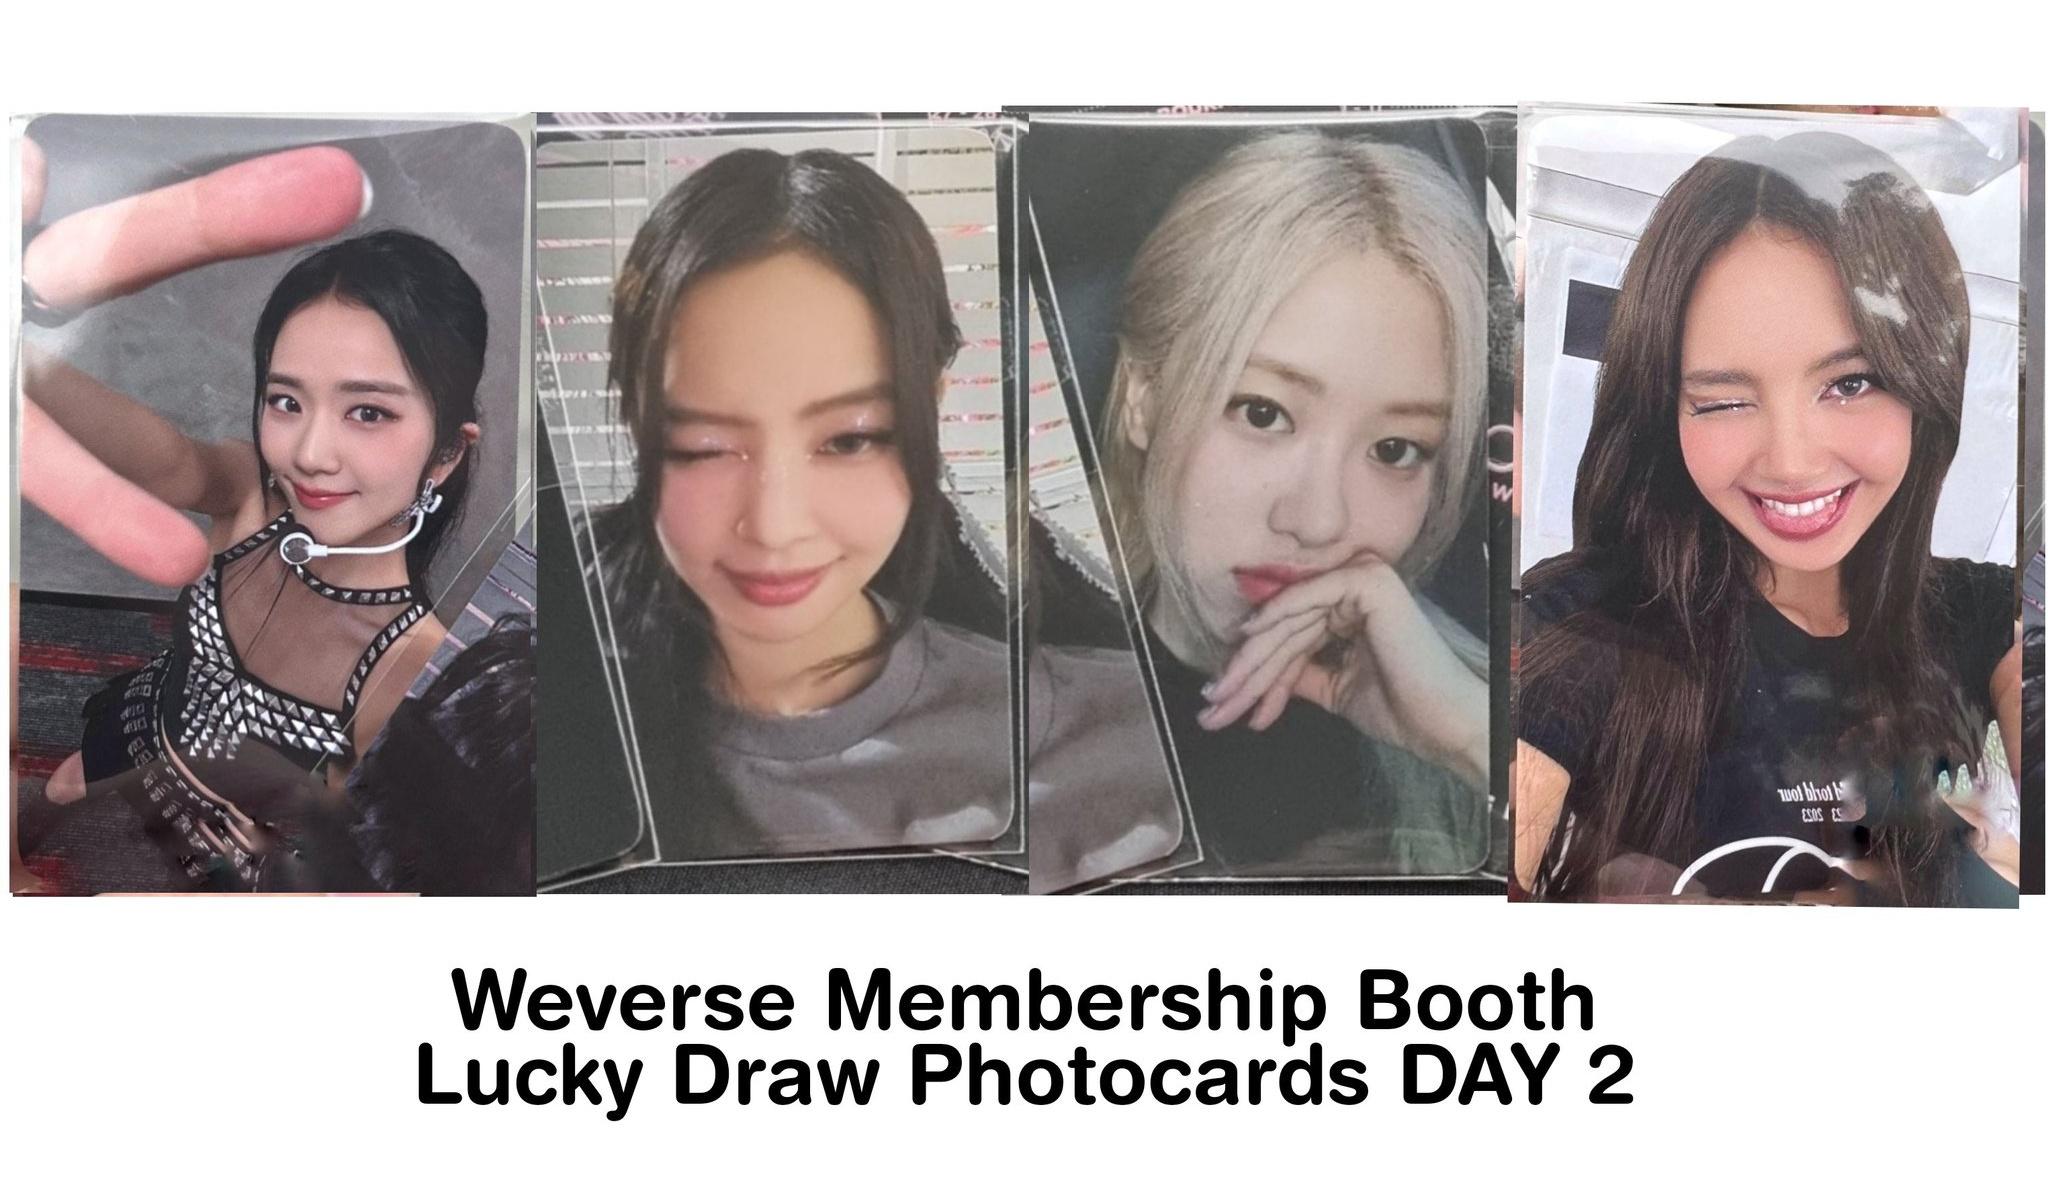 230918 Blackpink Day 2 Weverse Membership Booth Photocards are 🥰